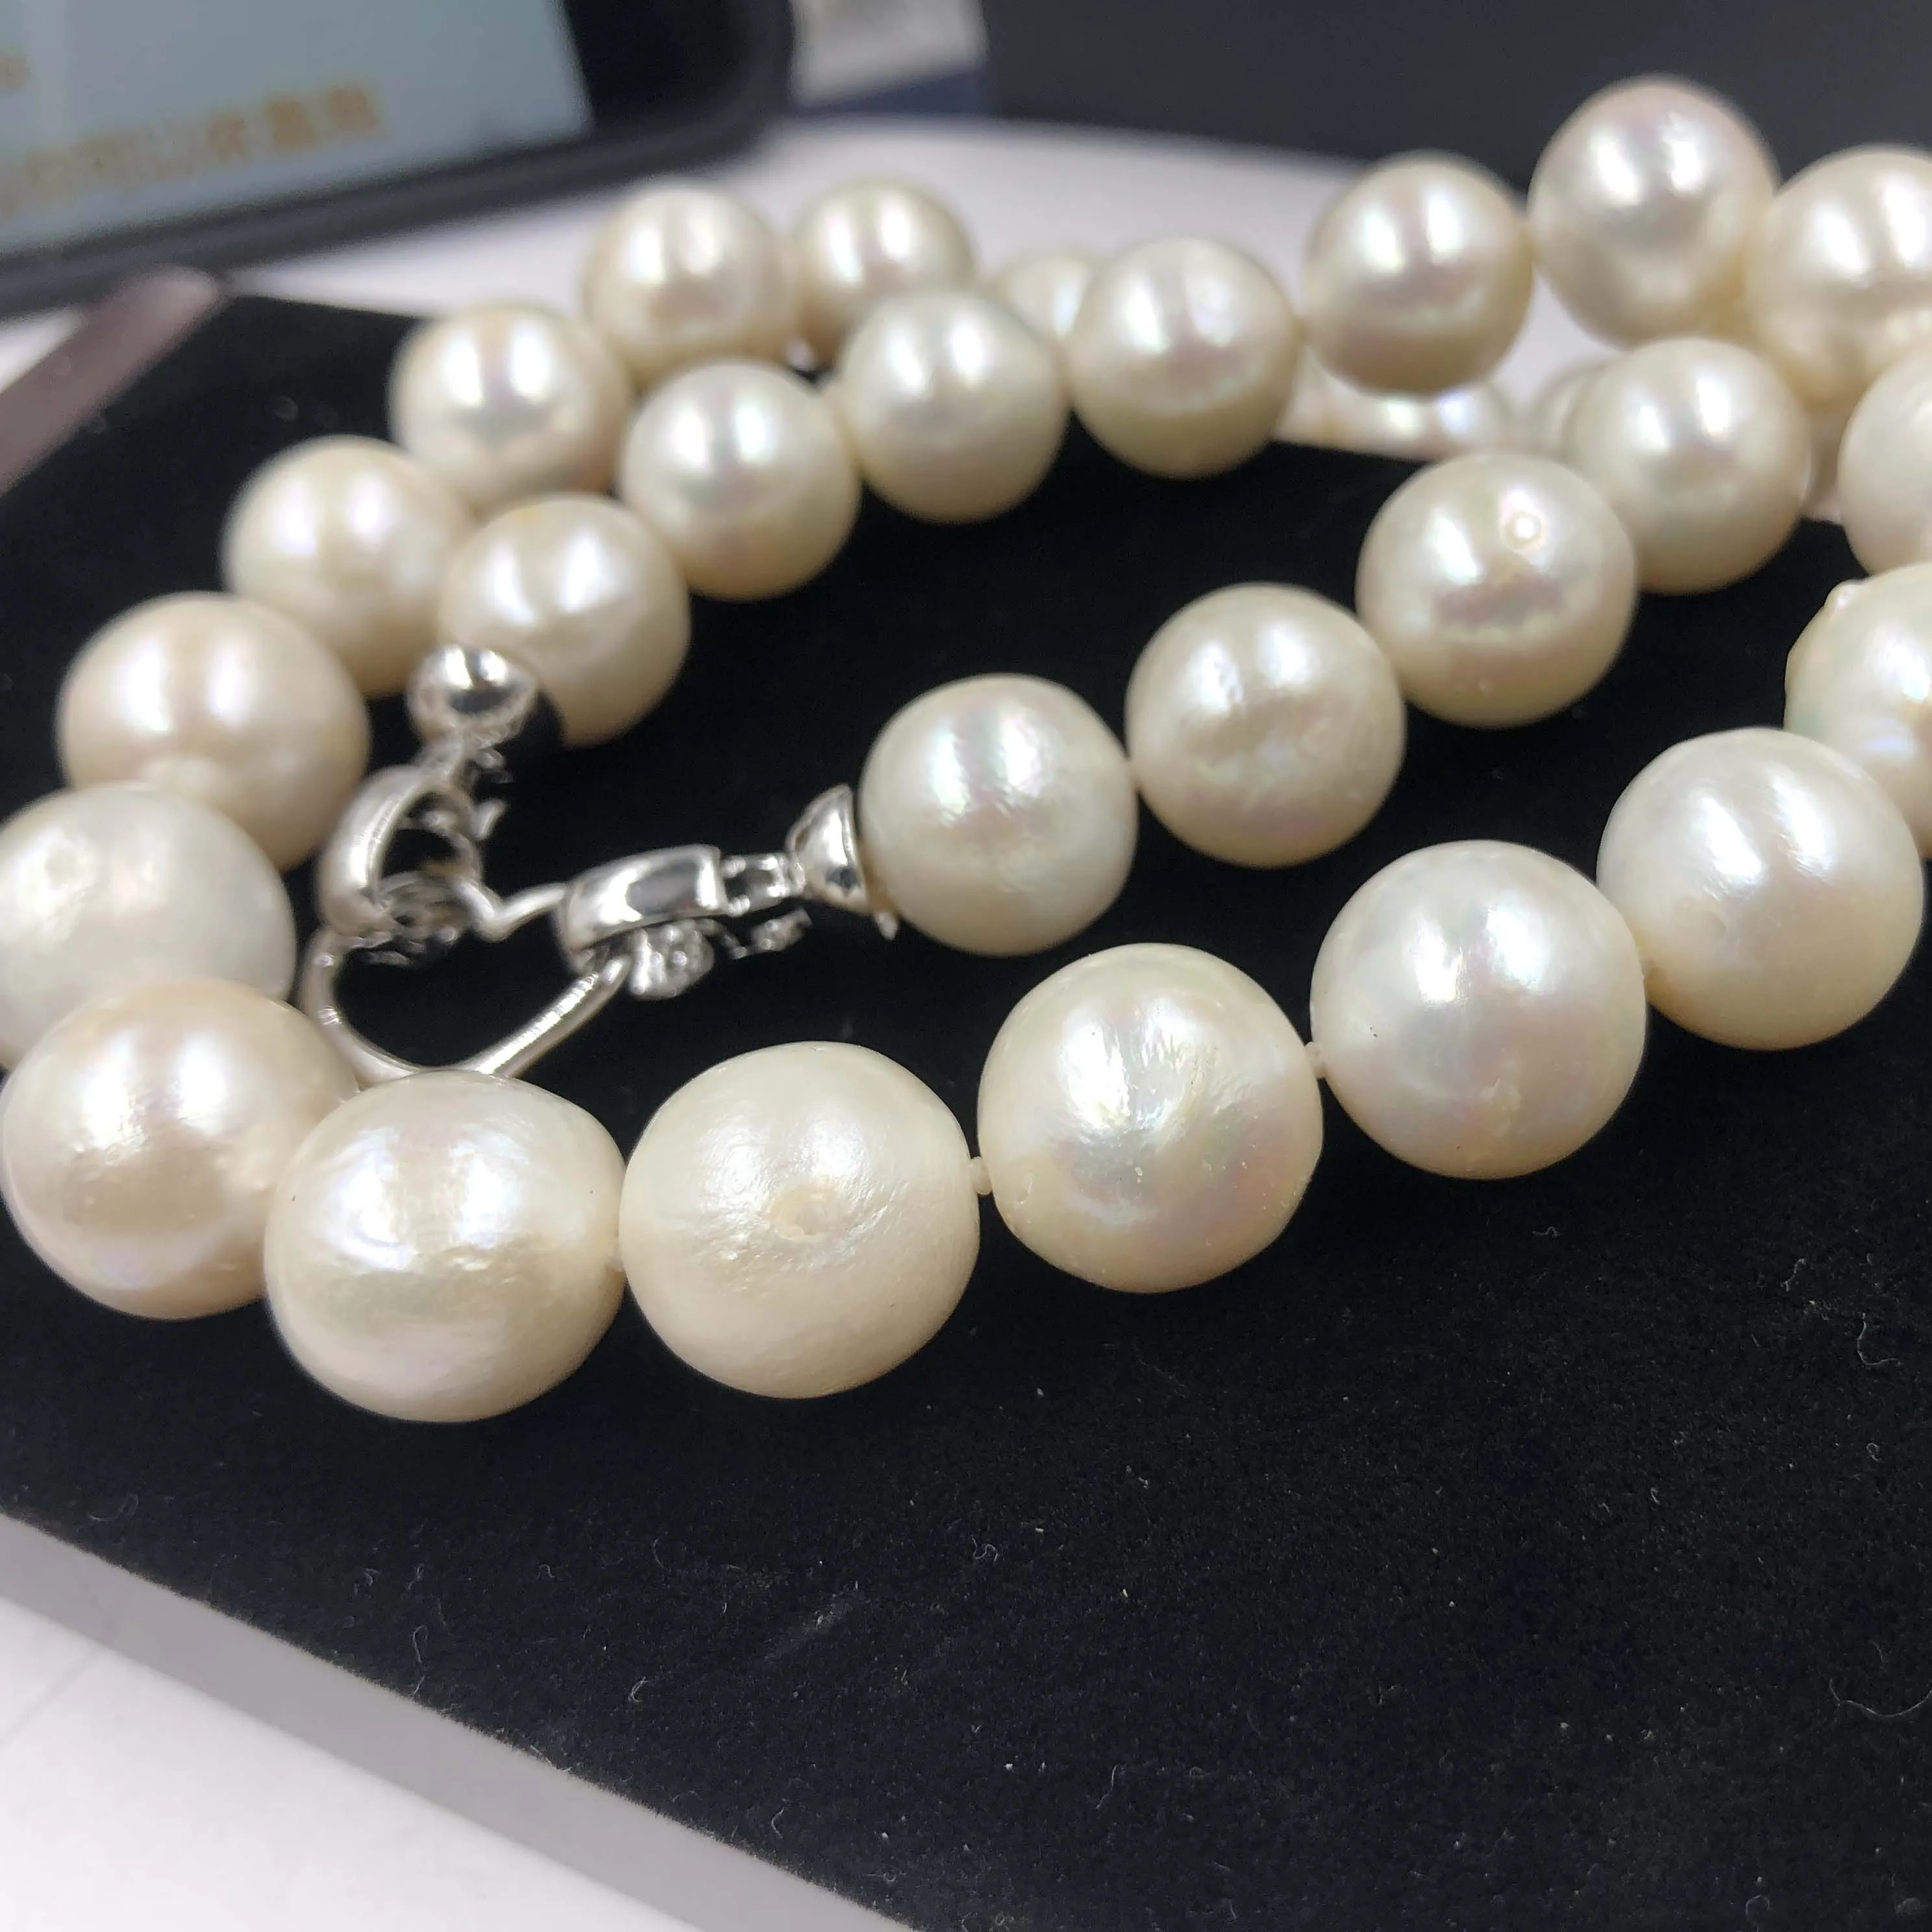 

[ELEISPL] Large12-14mm Natural Thick Skin White Furrow Freshwater Pearl Necklace #22010210